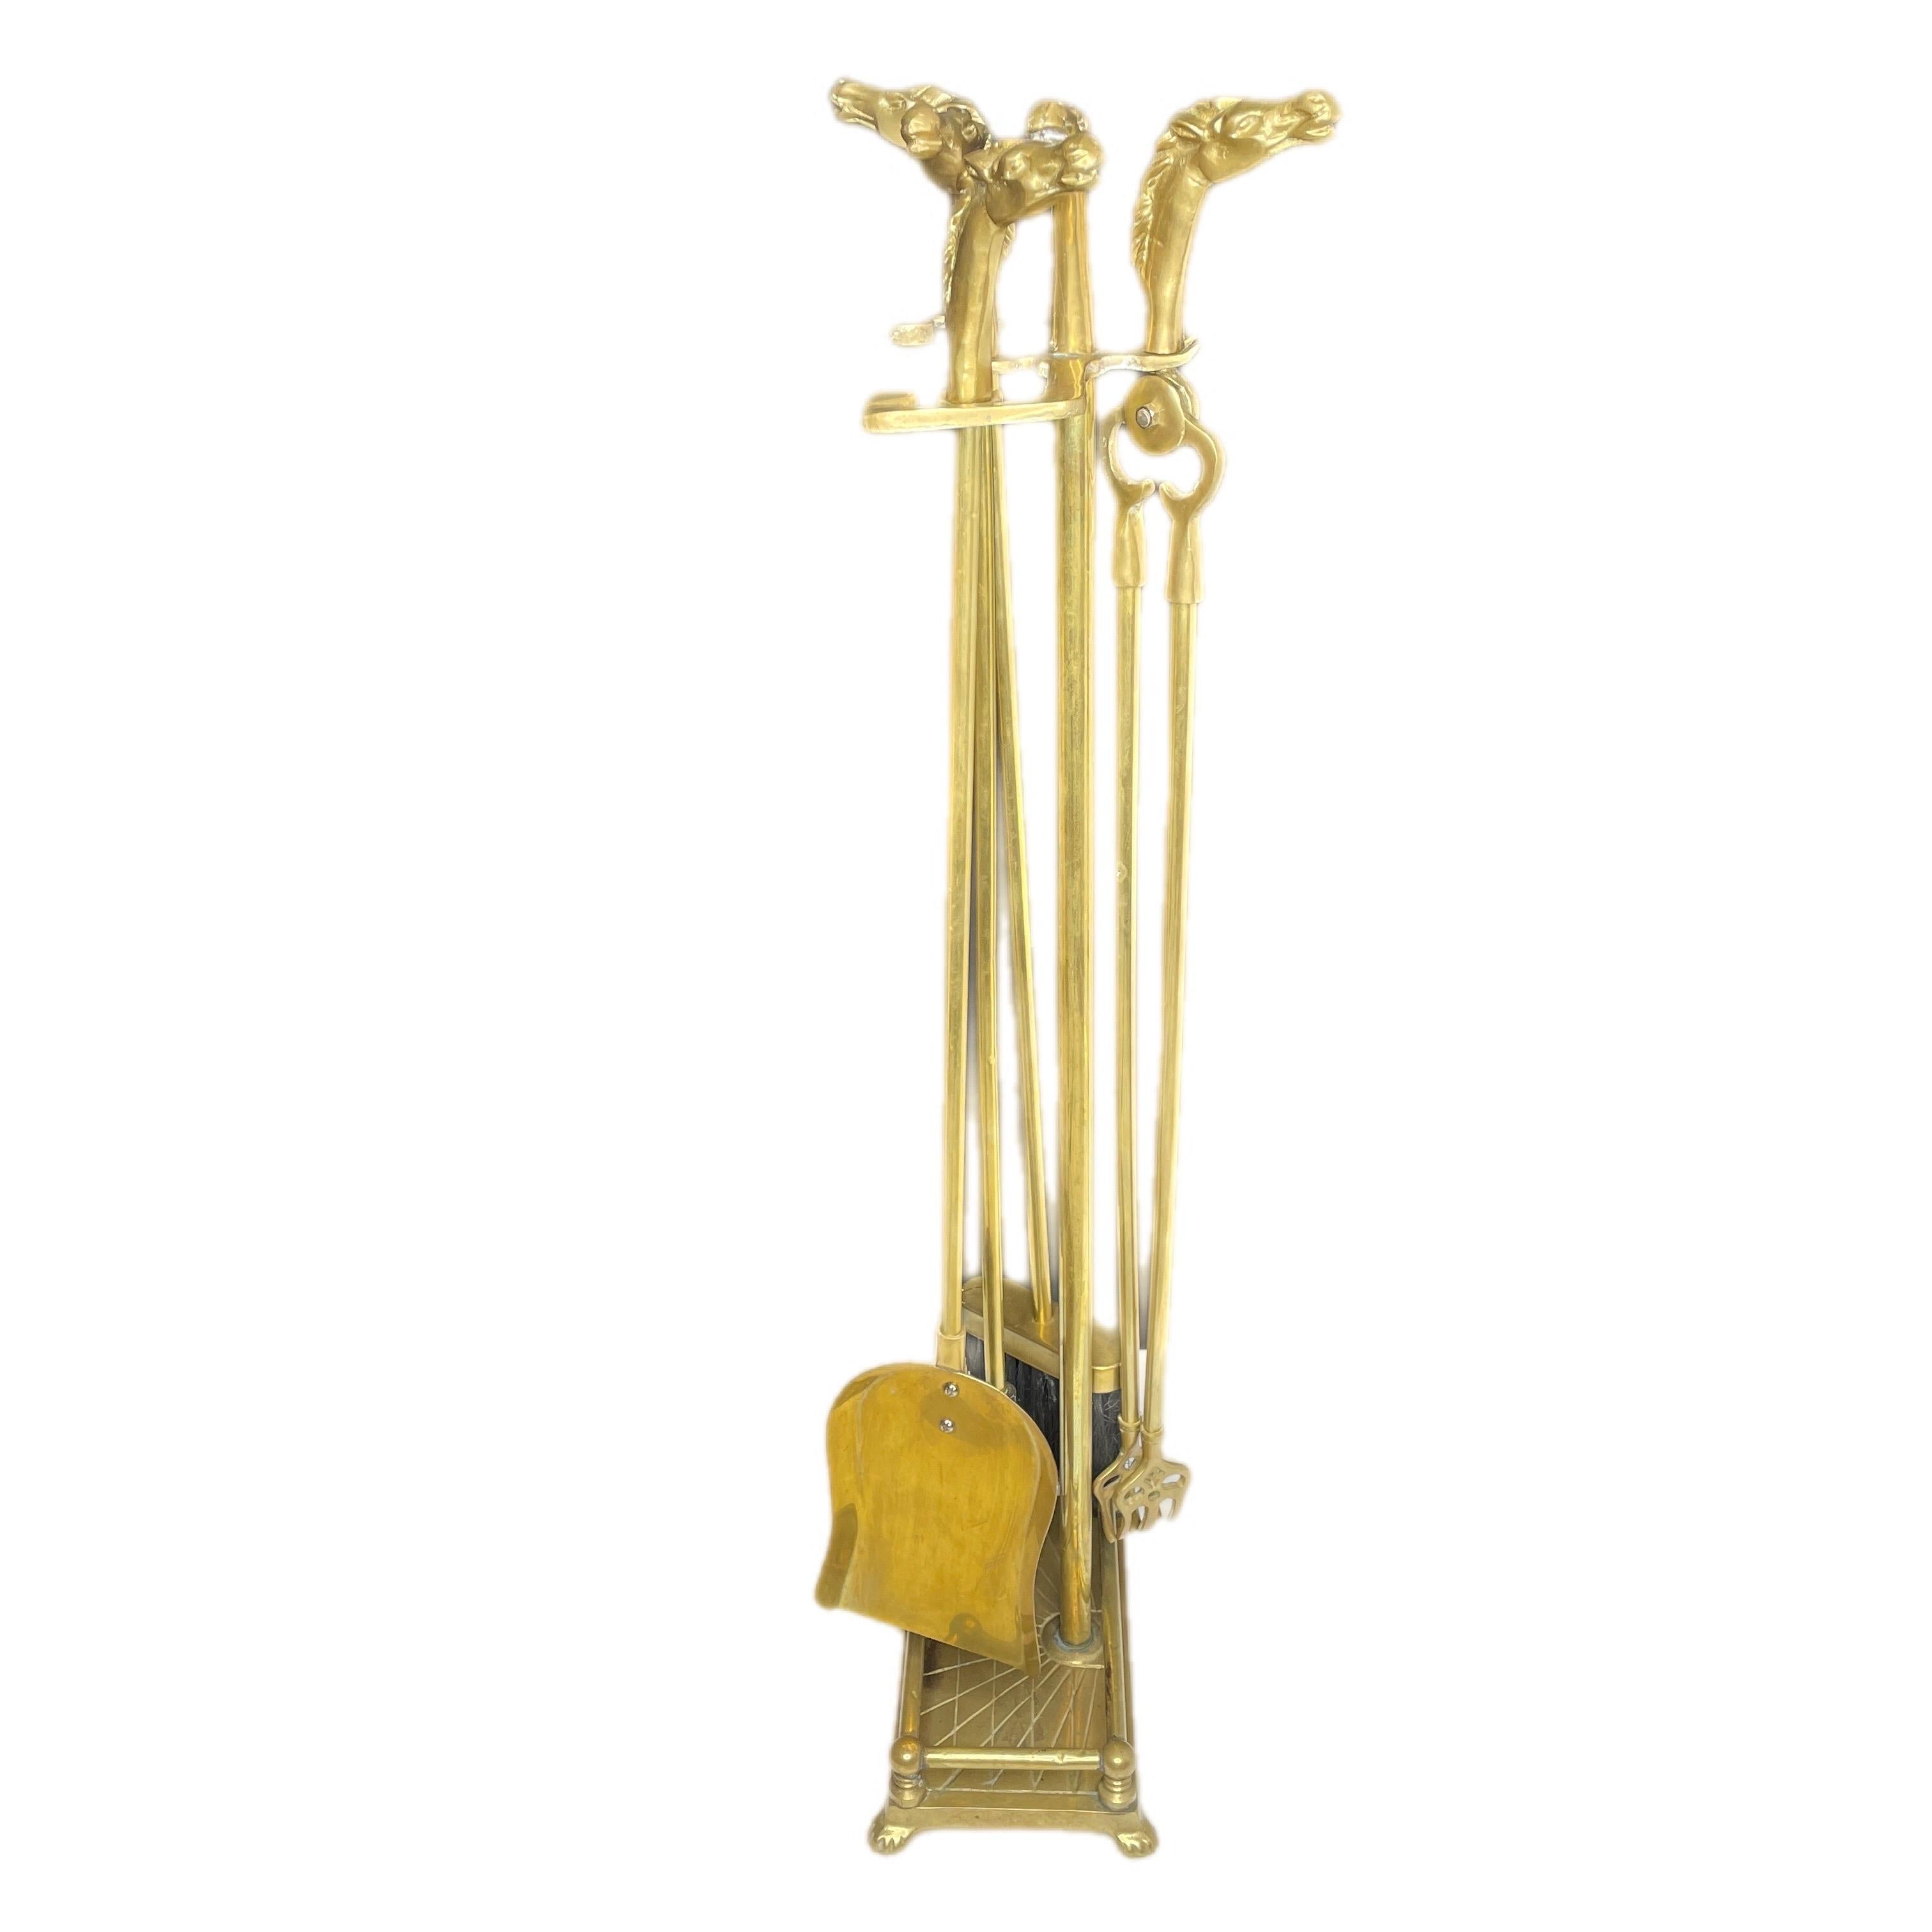 Vintage French Brass Fireplace Tools Set with Horse Head Motif, 1950s For Sale 2